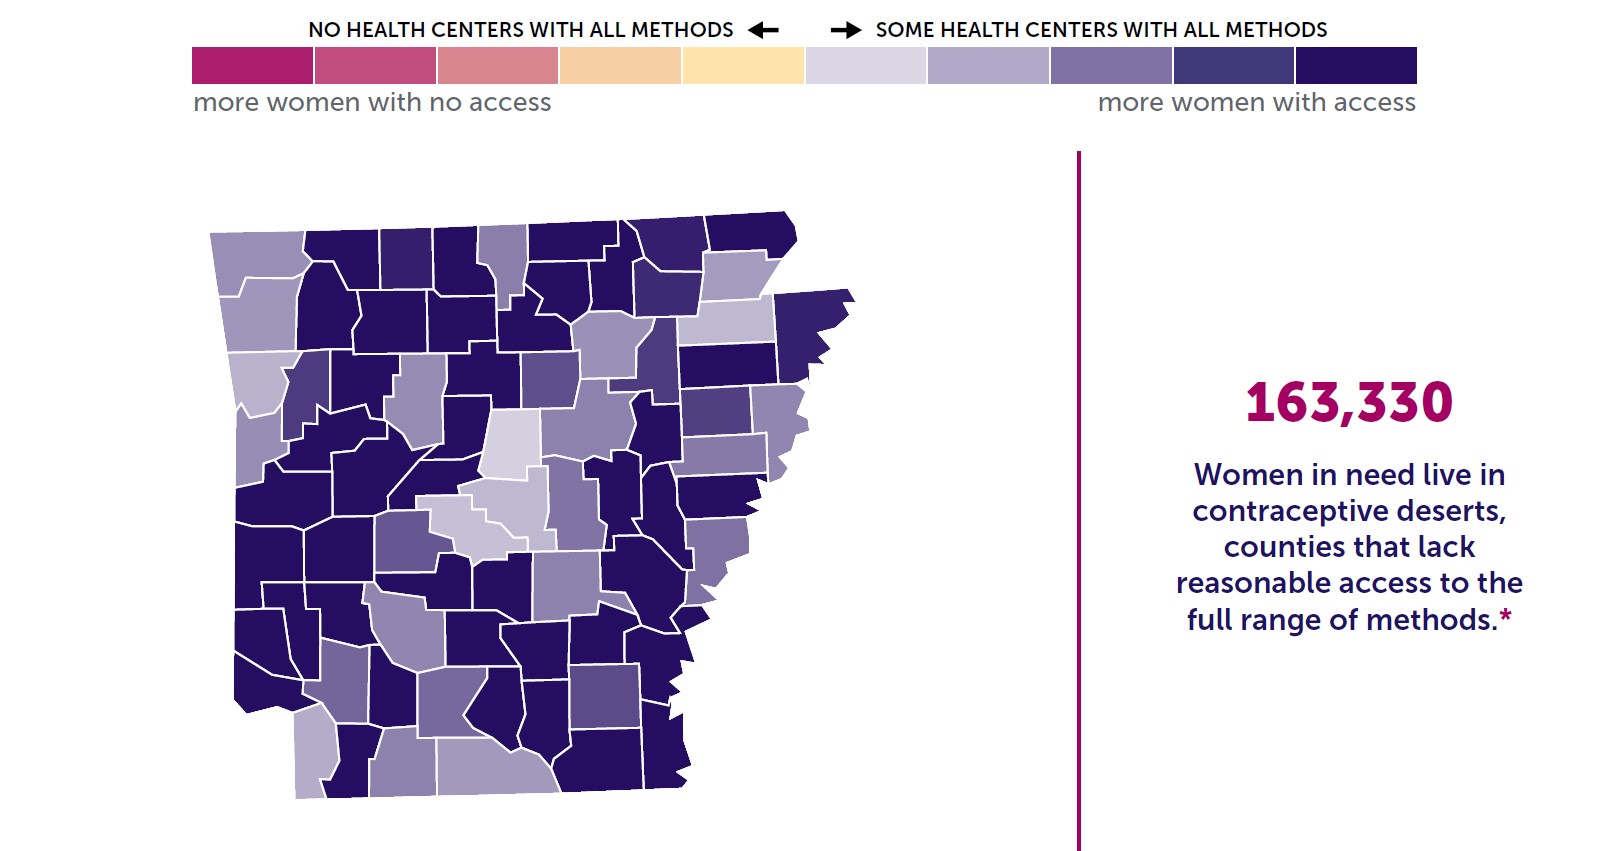 Map of Arkansas showing the state of contraceptive access by county.